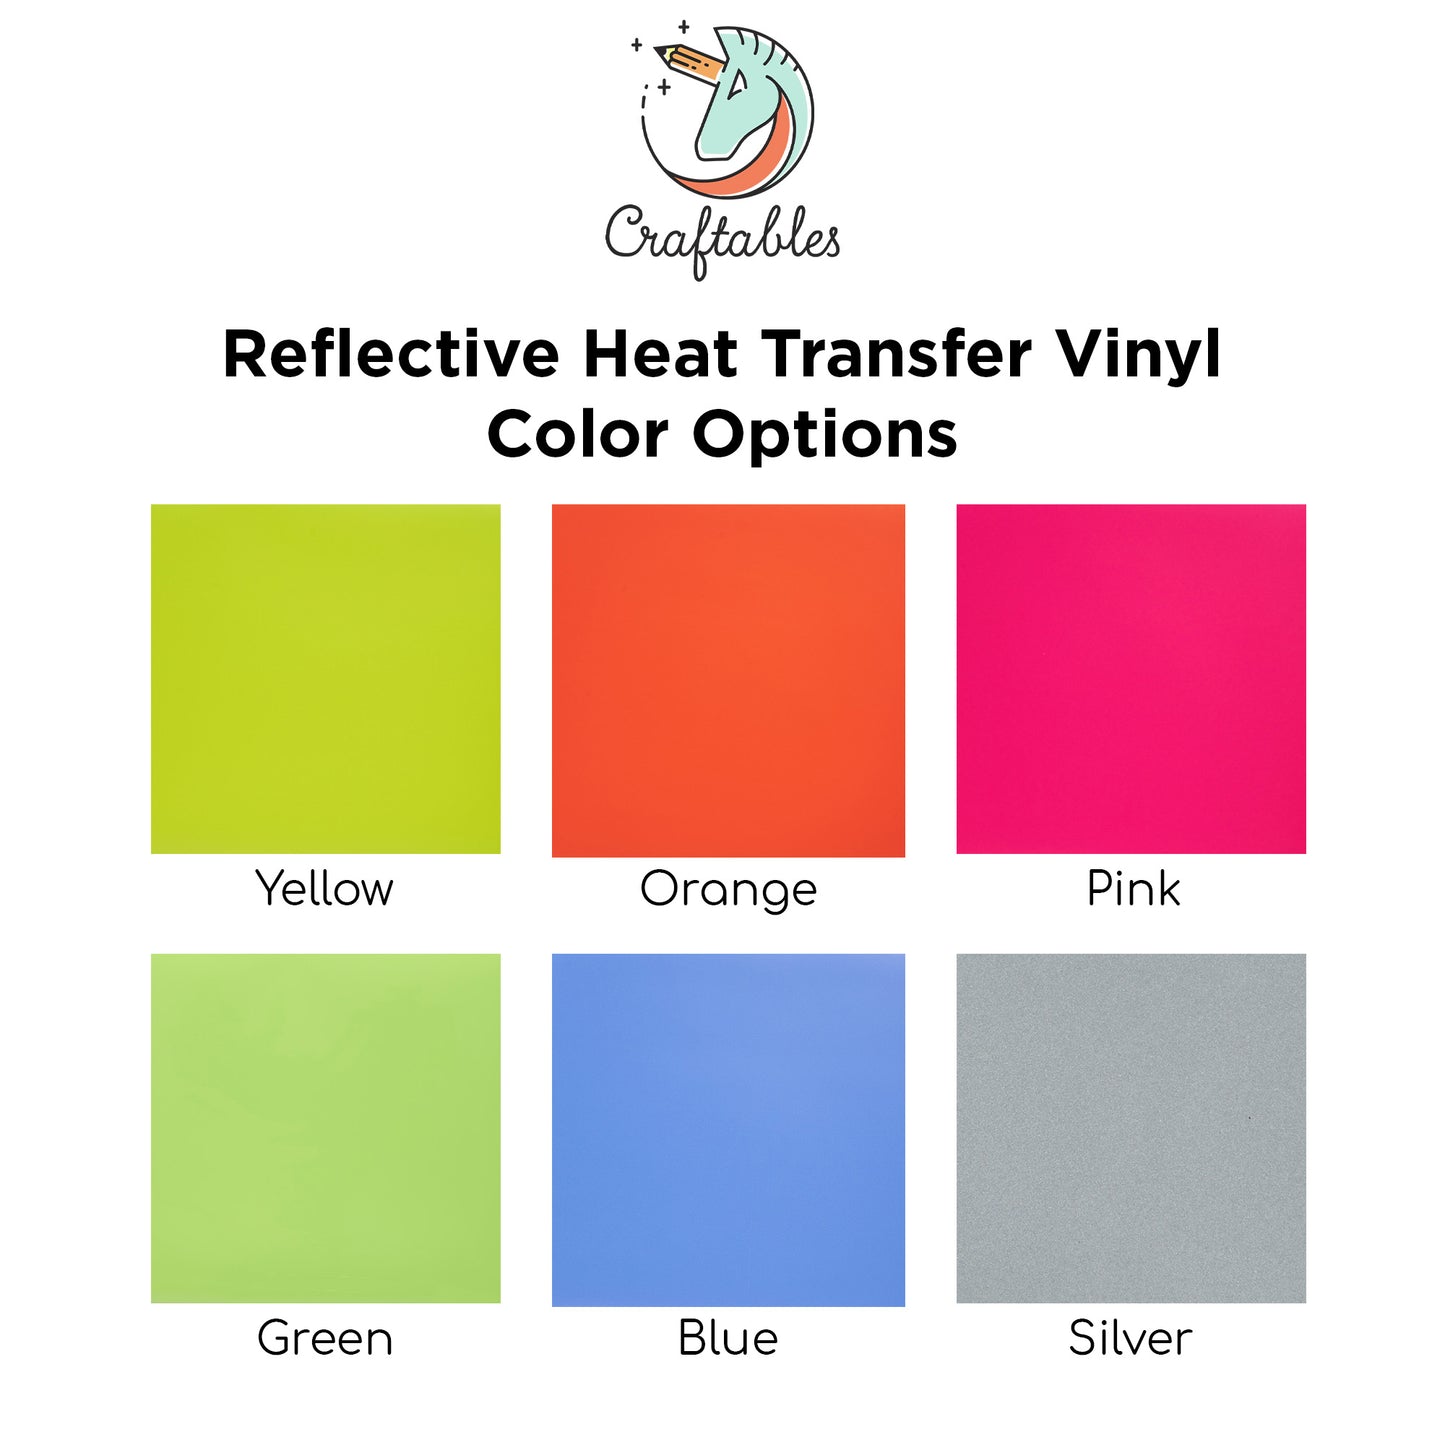 Blue Reflective Heat Transfer Vinyl Sheets By Craftables